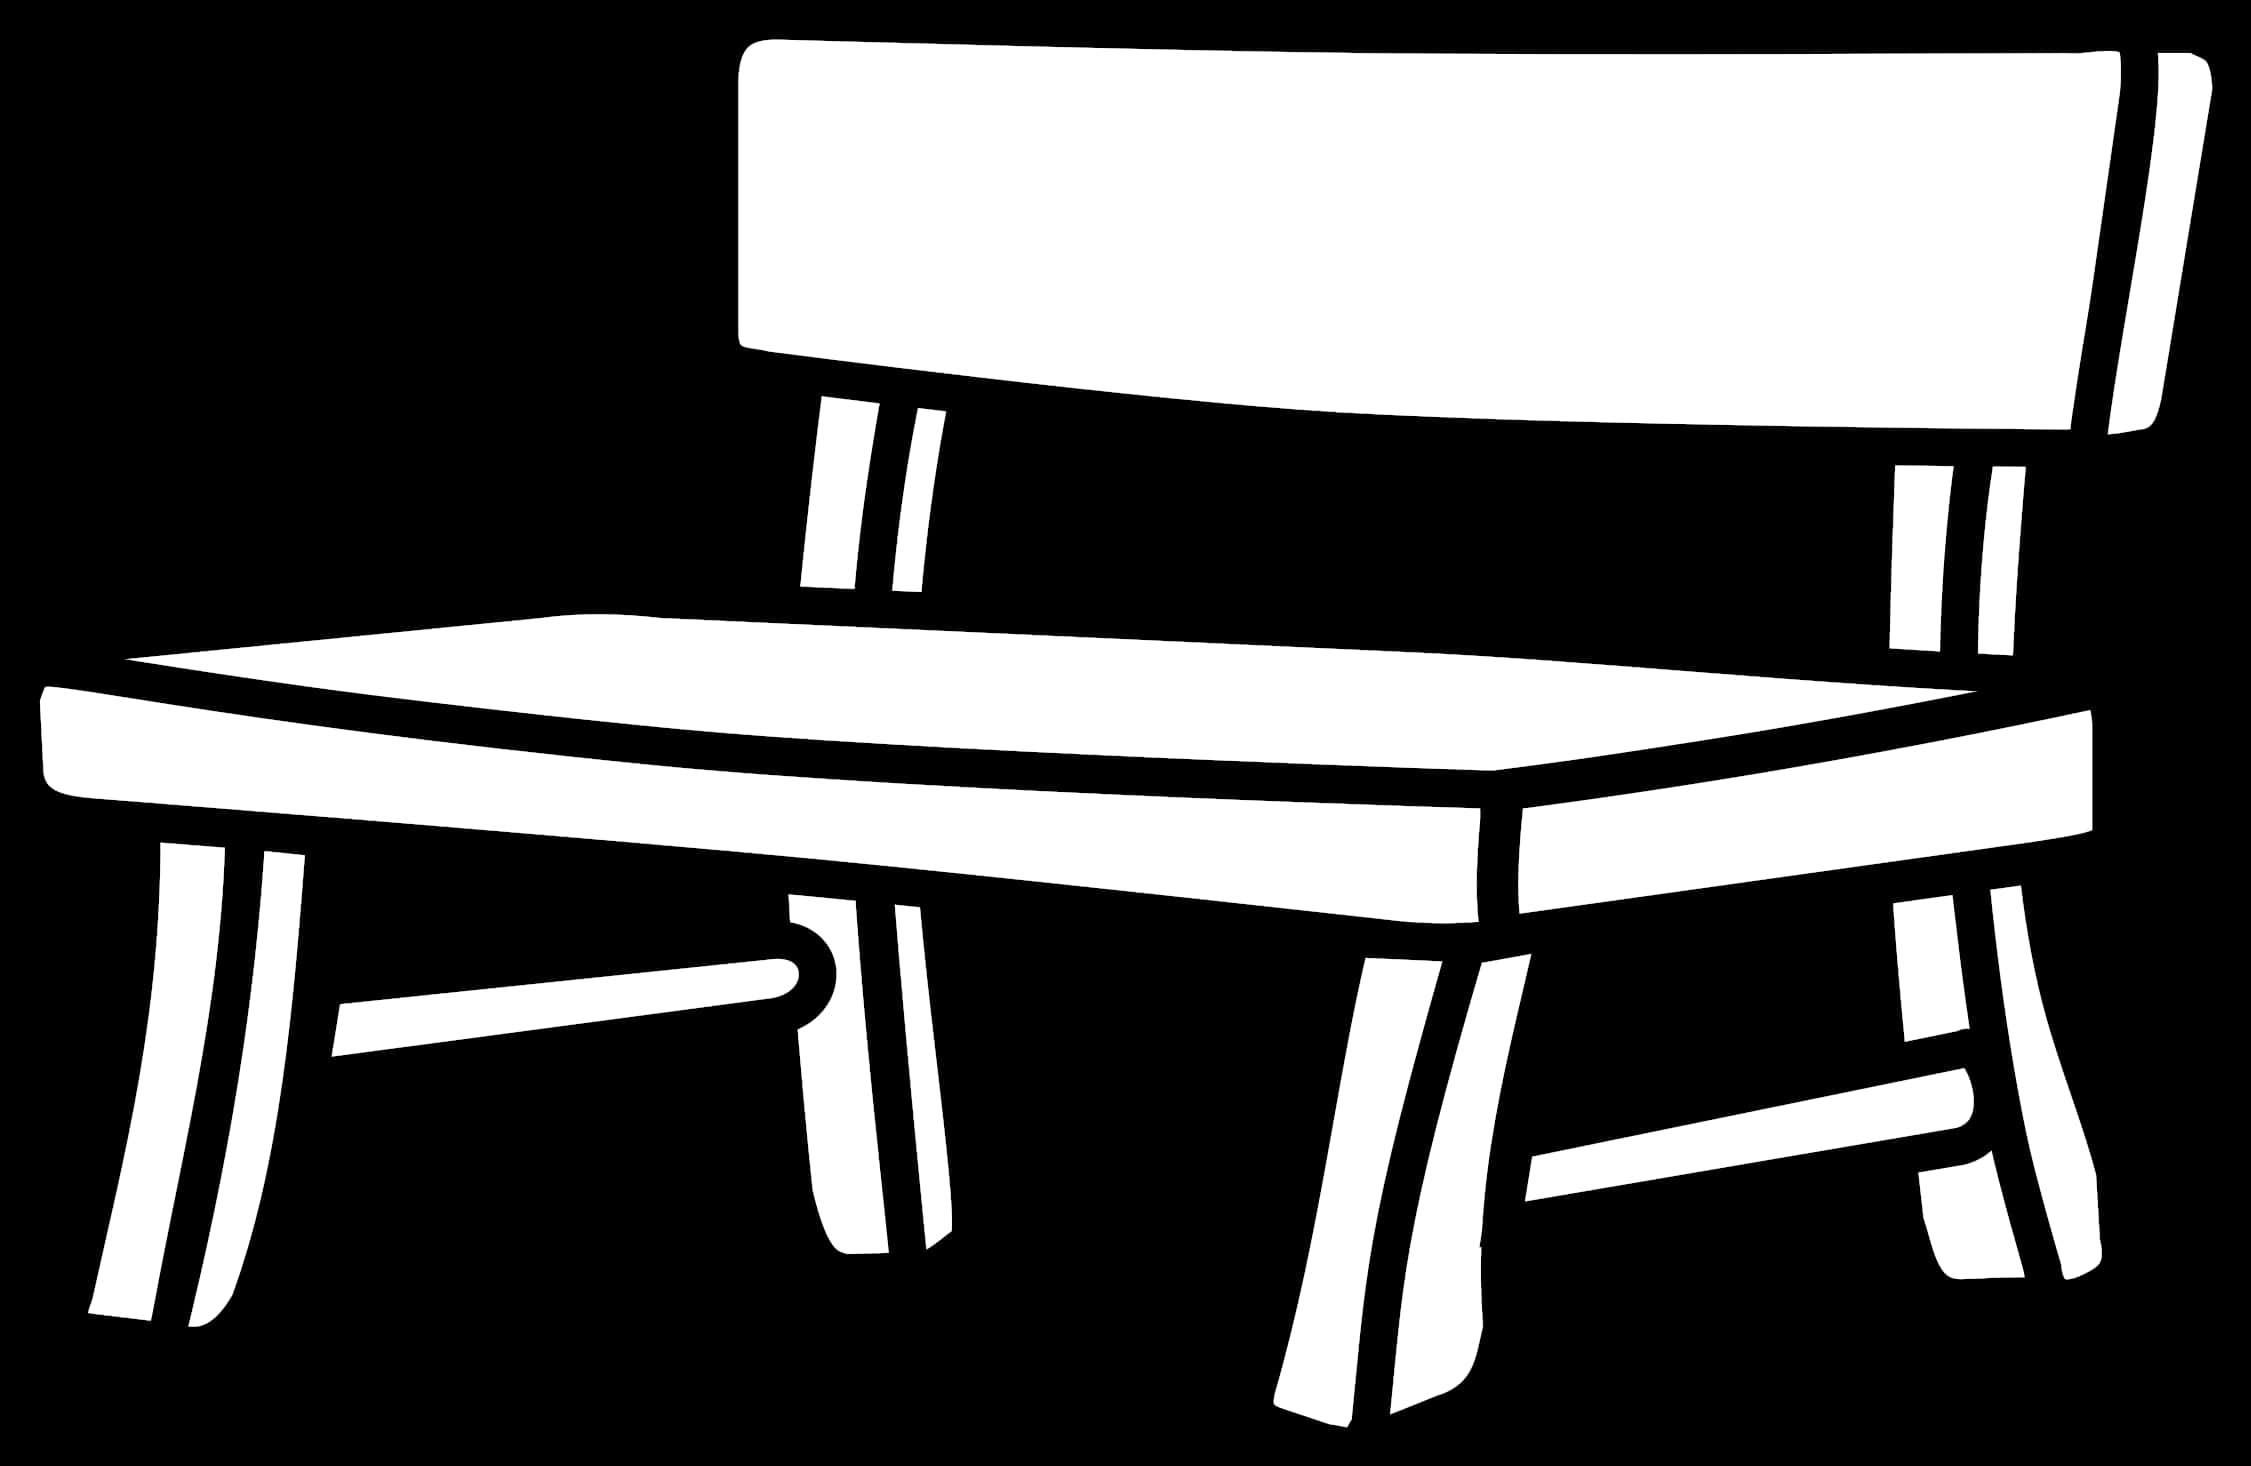 Simplified Park Bench Graphic PNG image